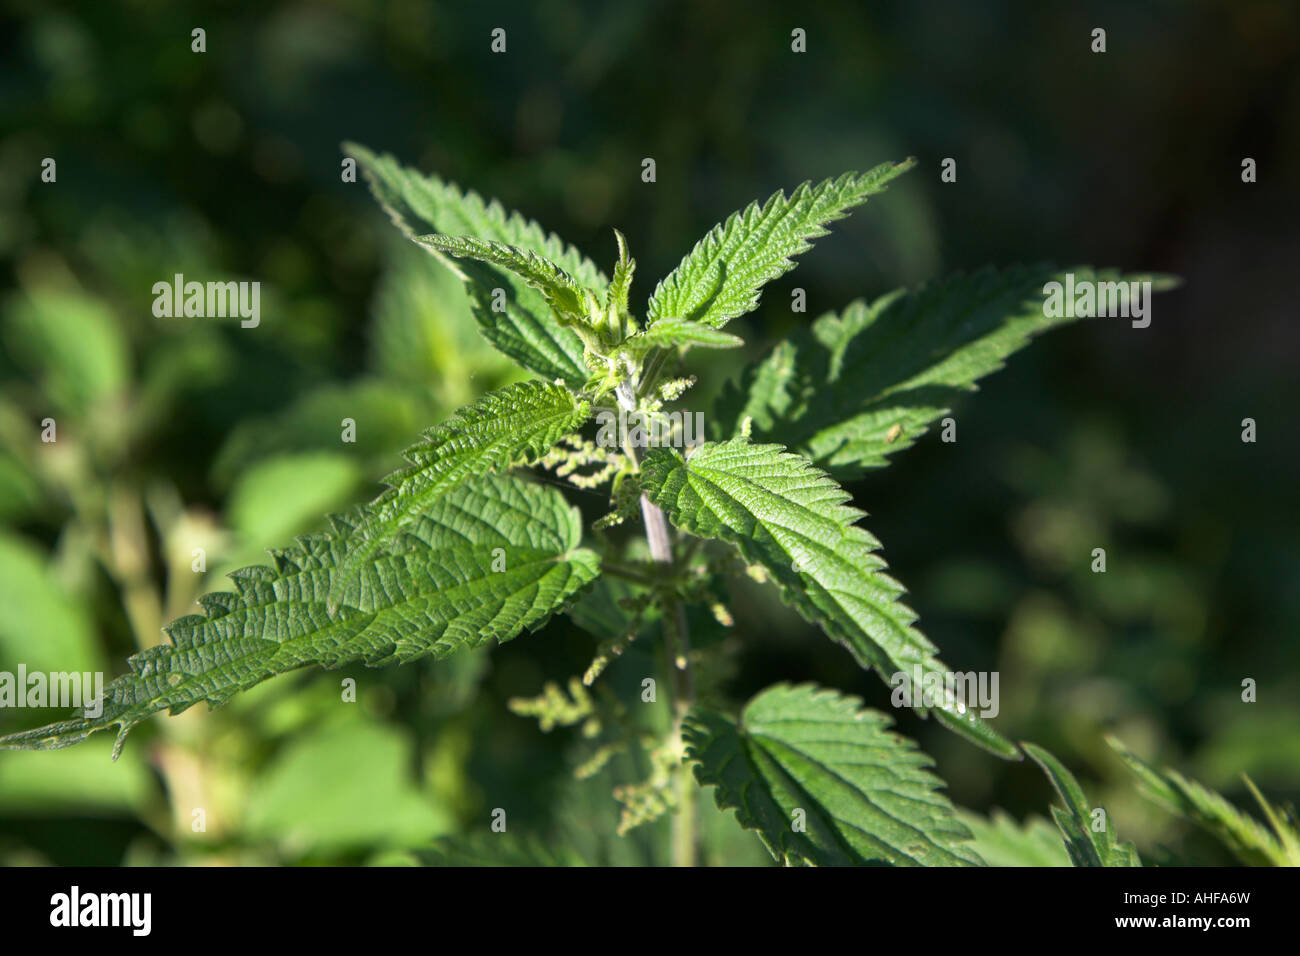 Top of growing stinging nettle plant, urticaria silica, side view, Suffolk, England, UK Stock Photo